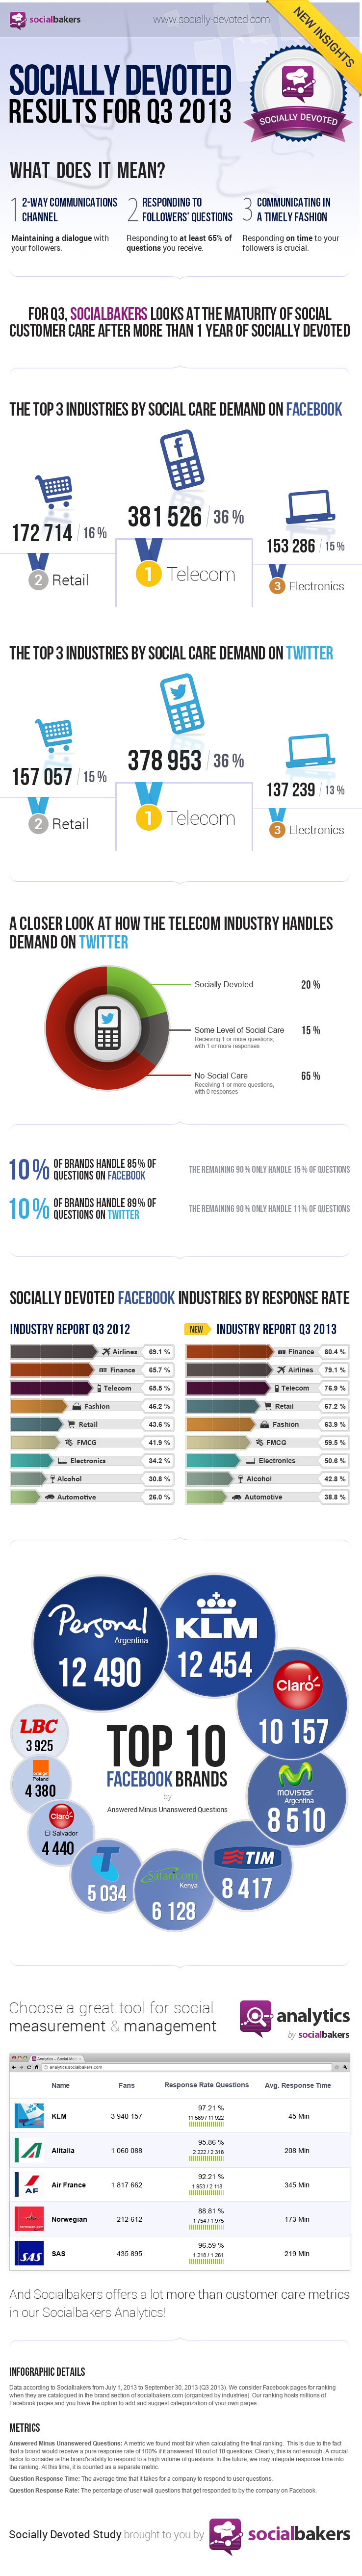 Socially Devoted 2013 Q3 results